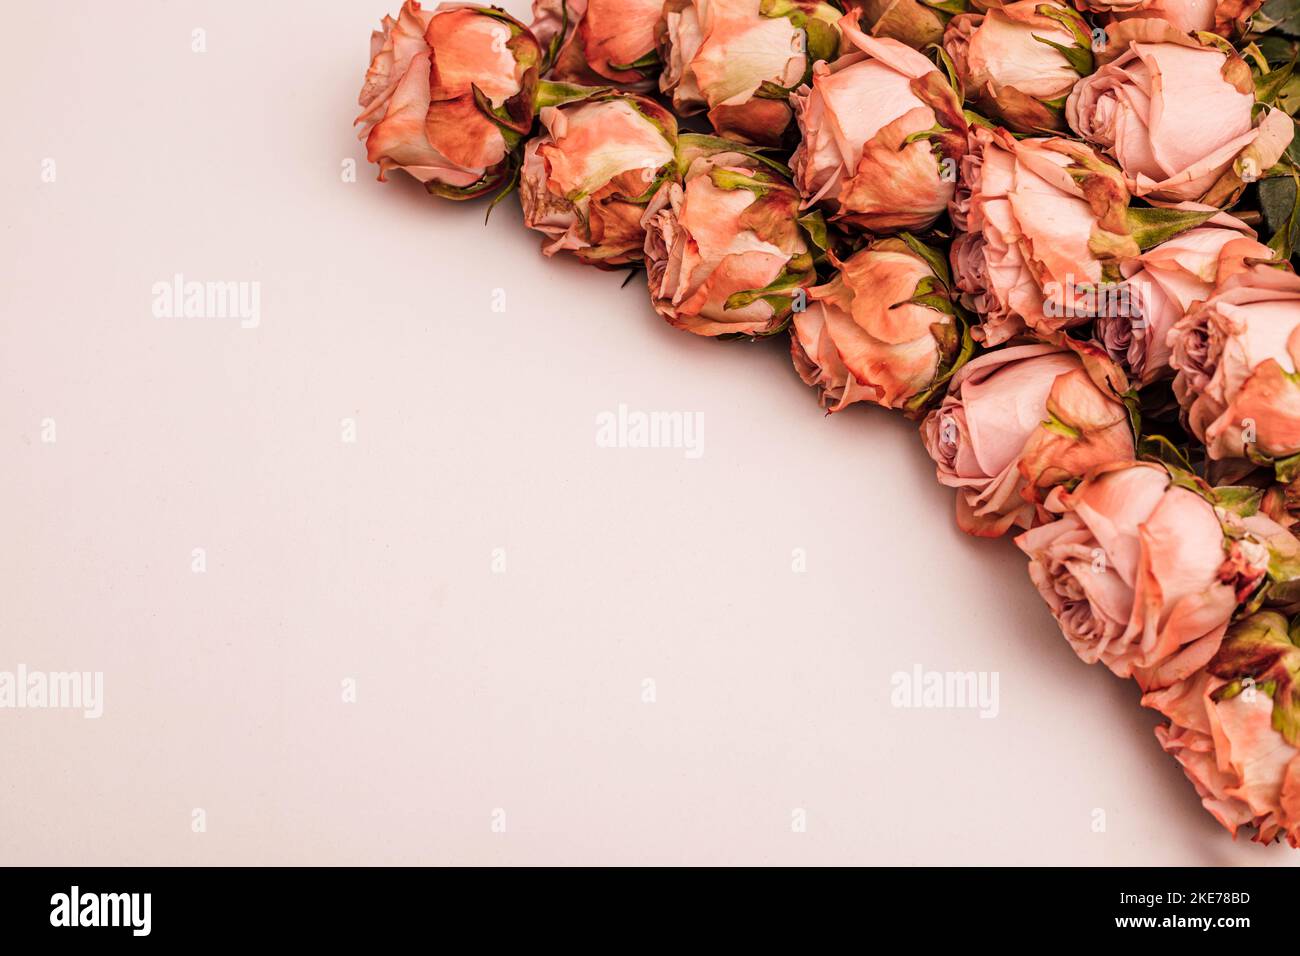 Orange roses are laid out on a monochromatic background.  Stock Photo